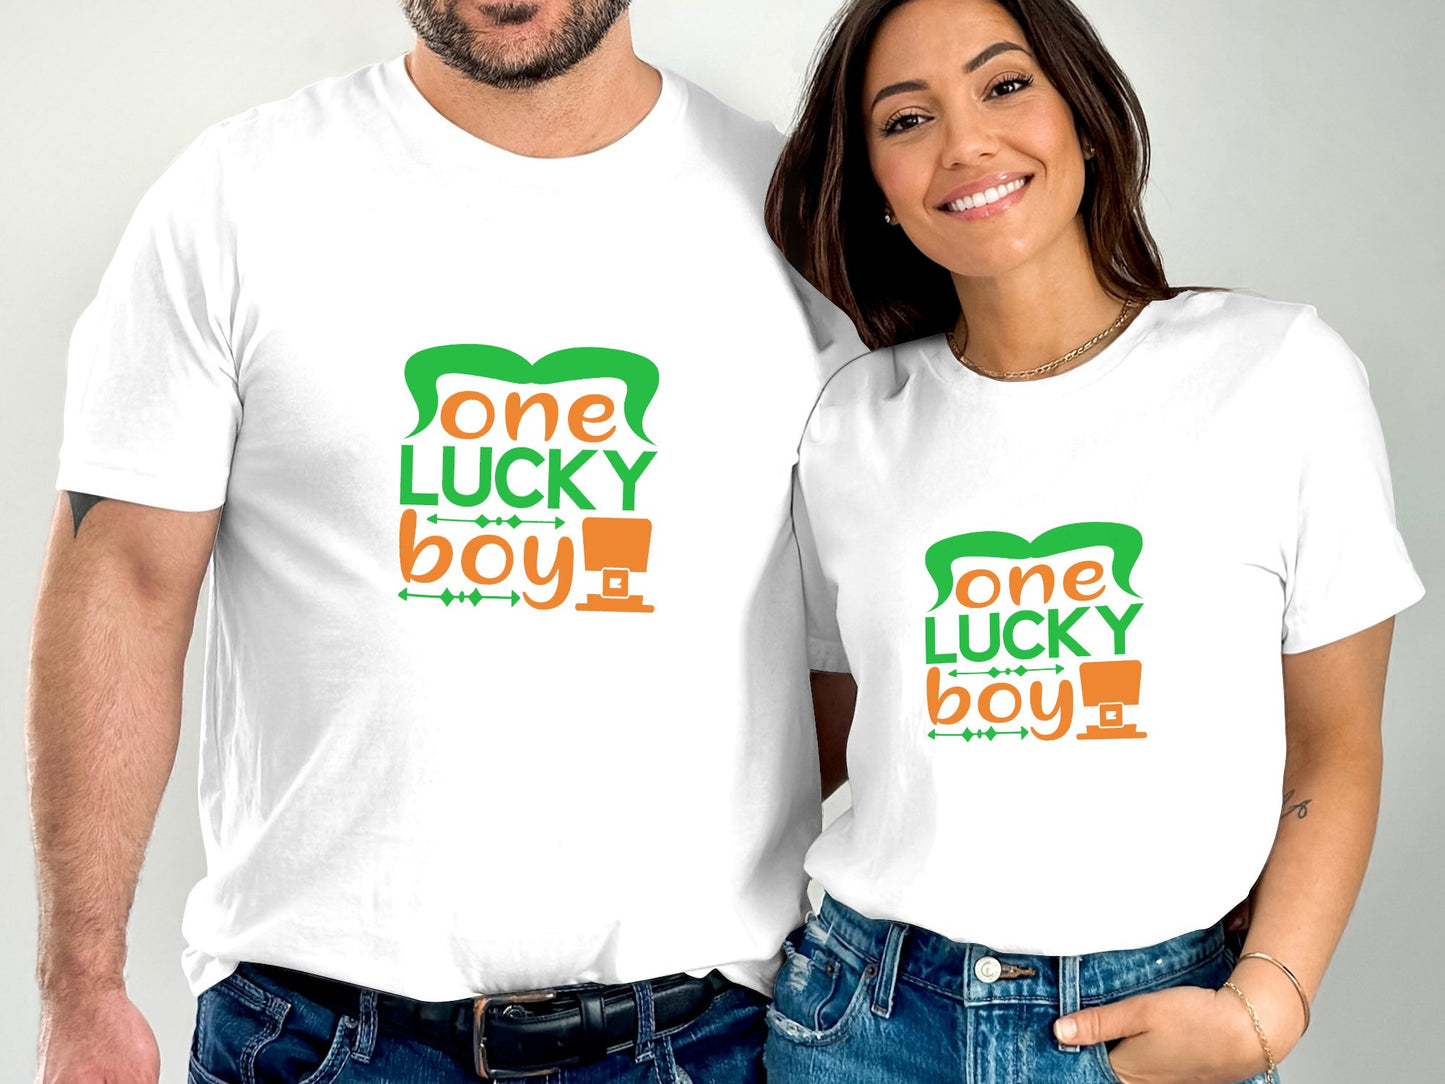 One Lucky Boy (St. Patrick's Day T-shirt)